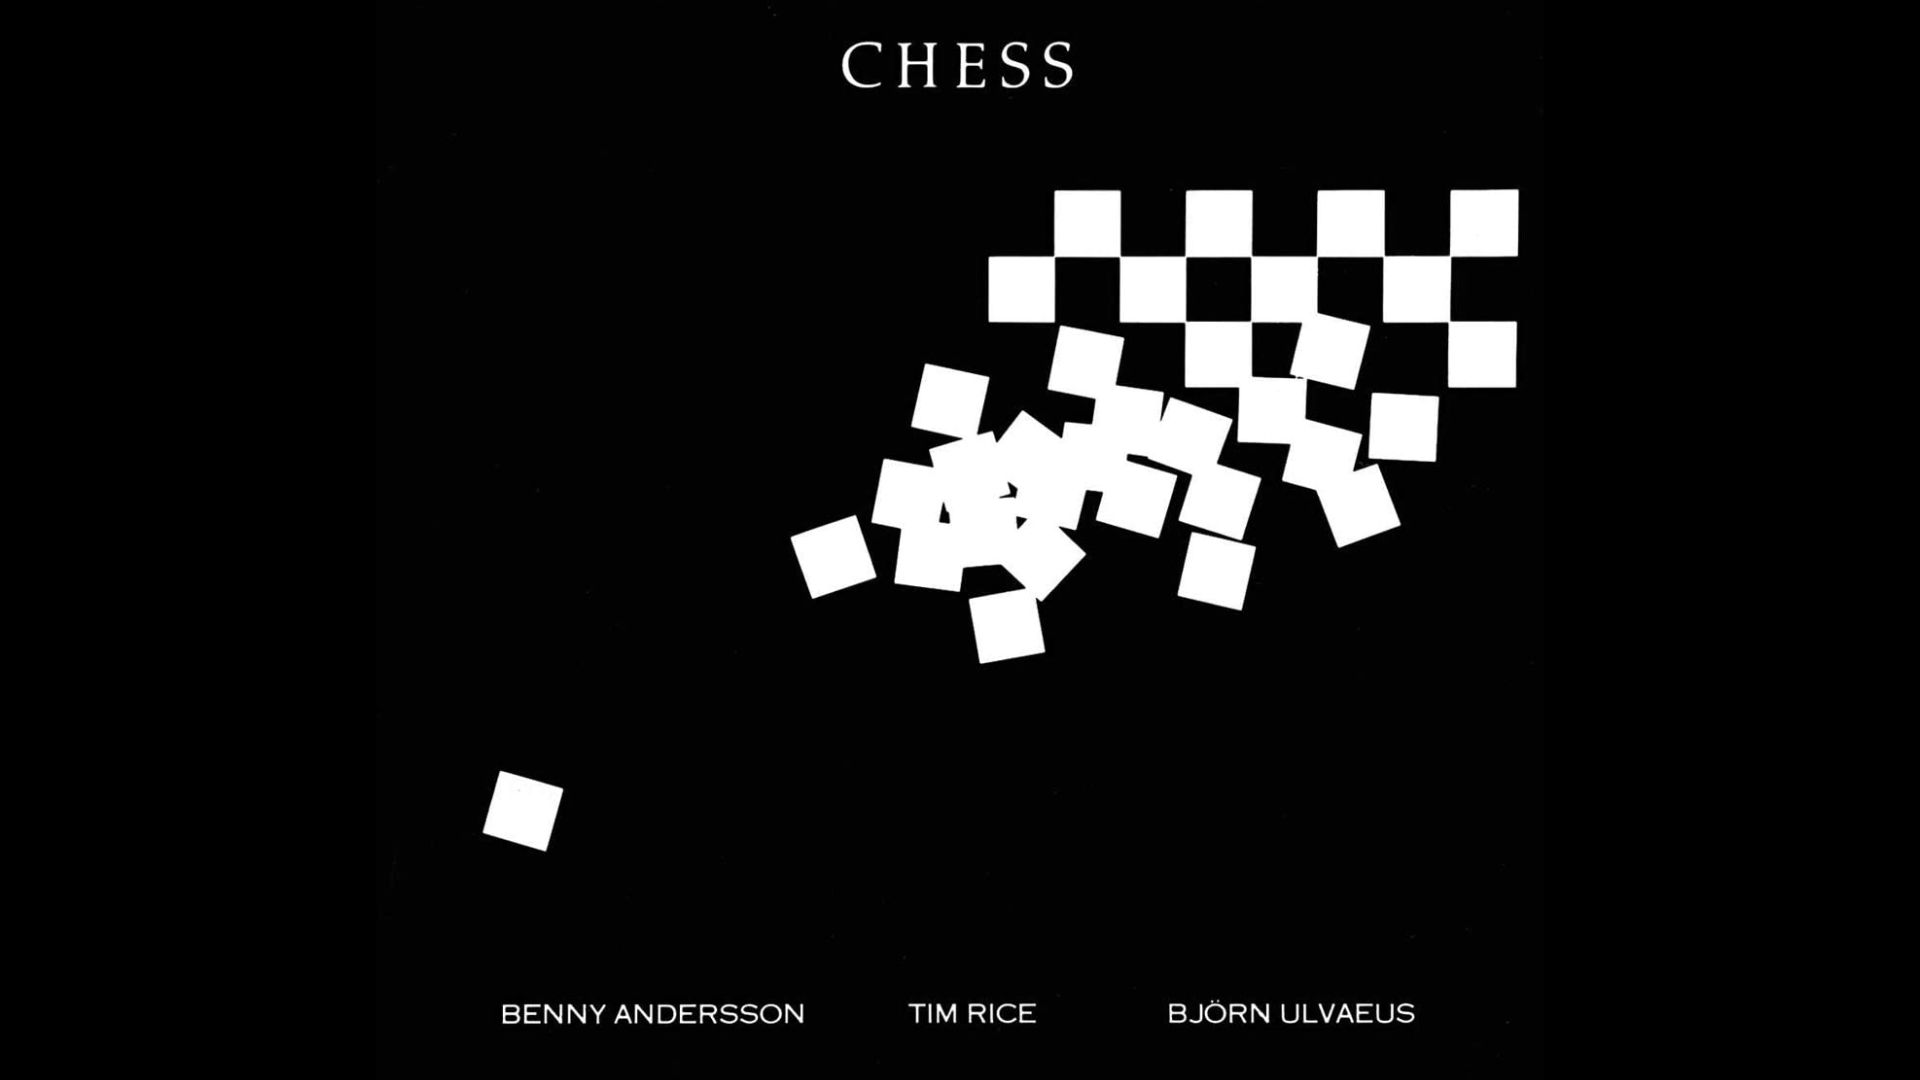 CHESS the Rock Opera at TADA, Announce